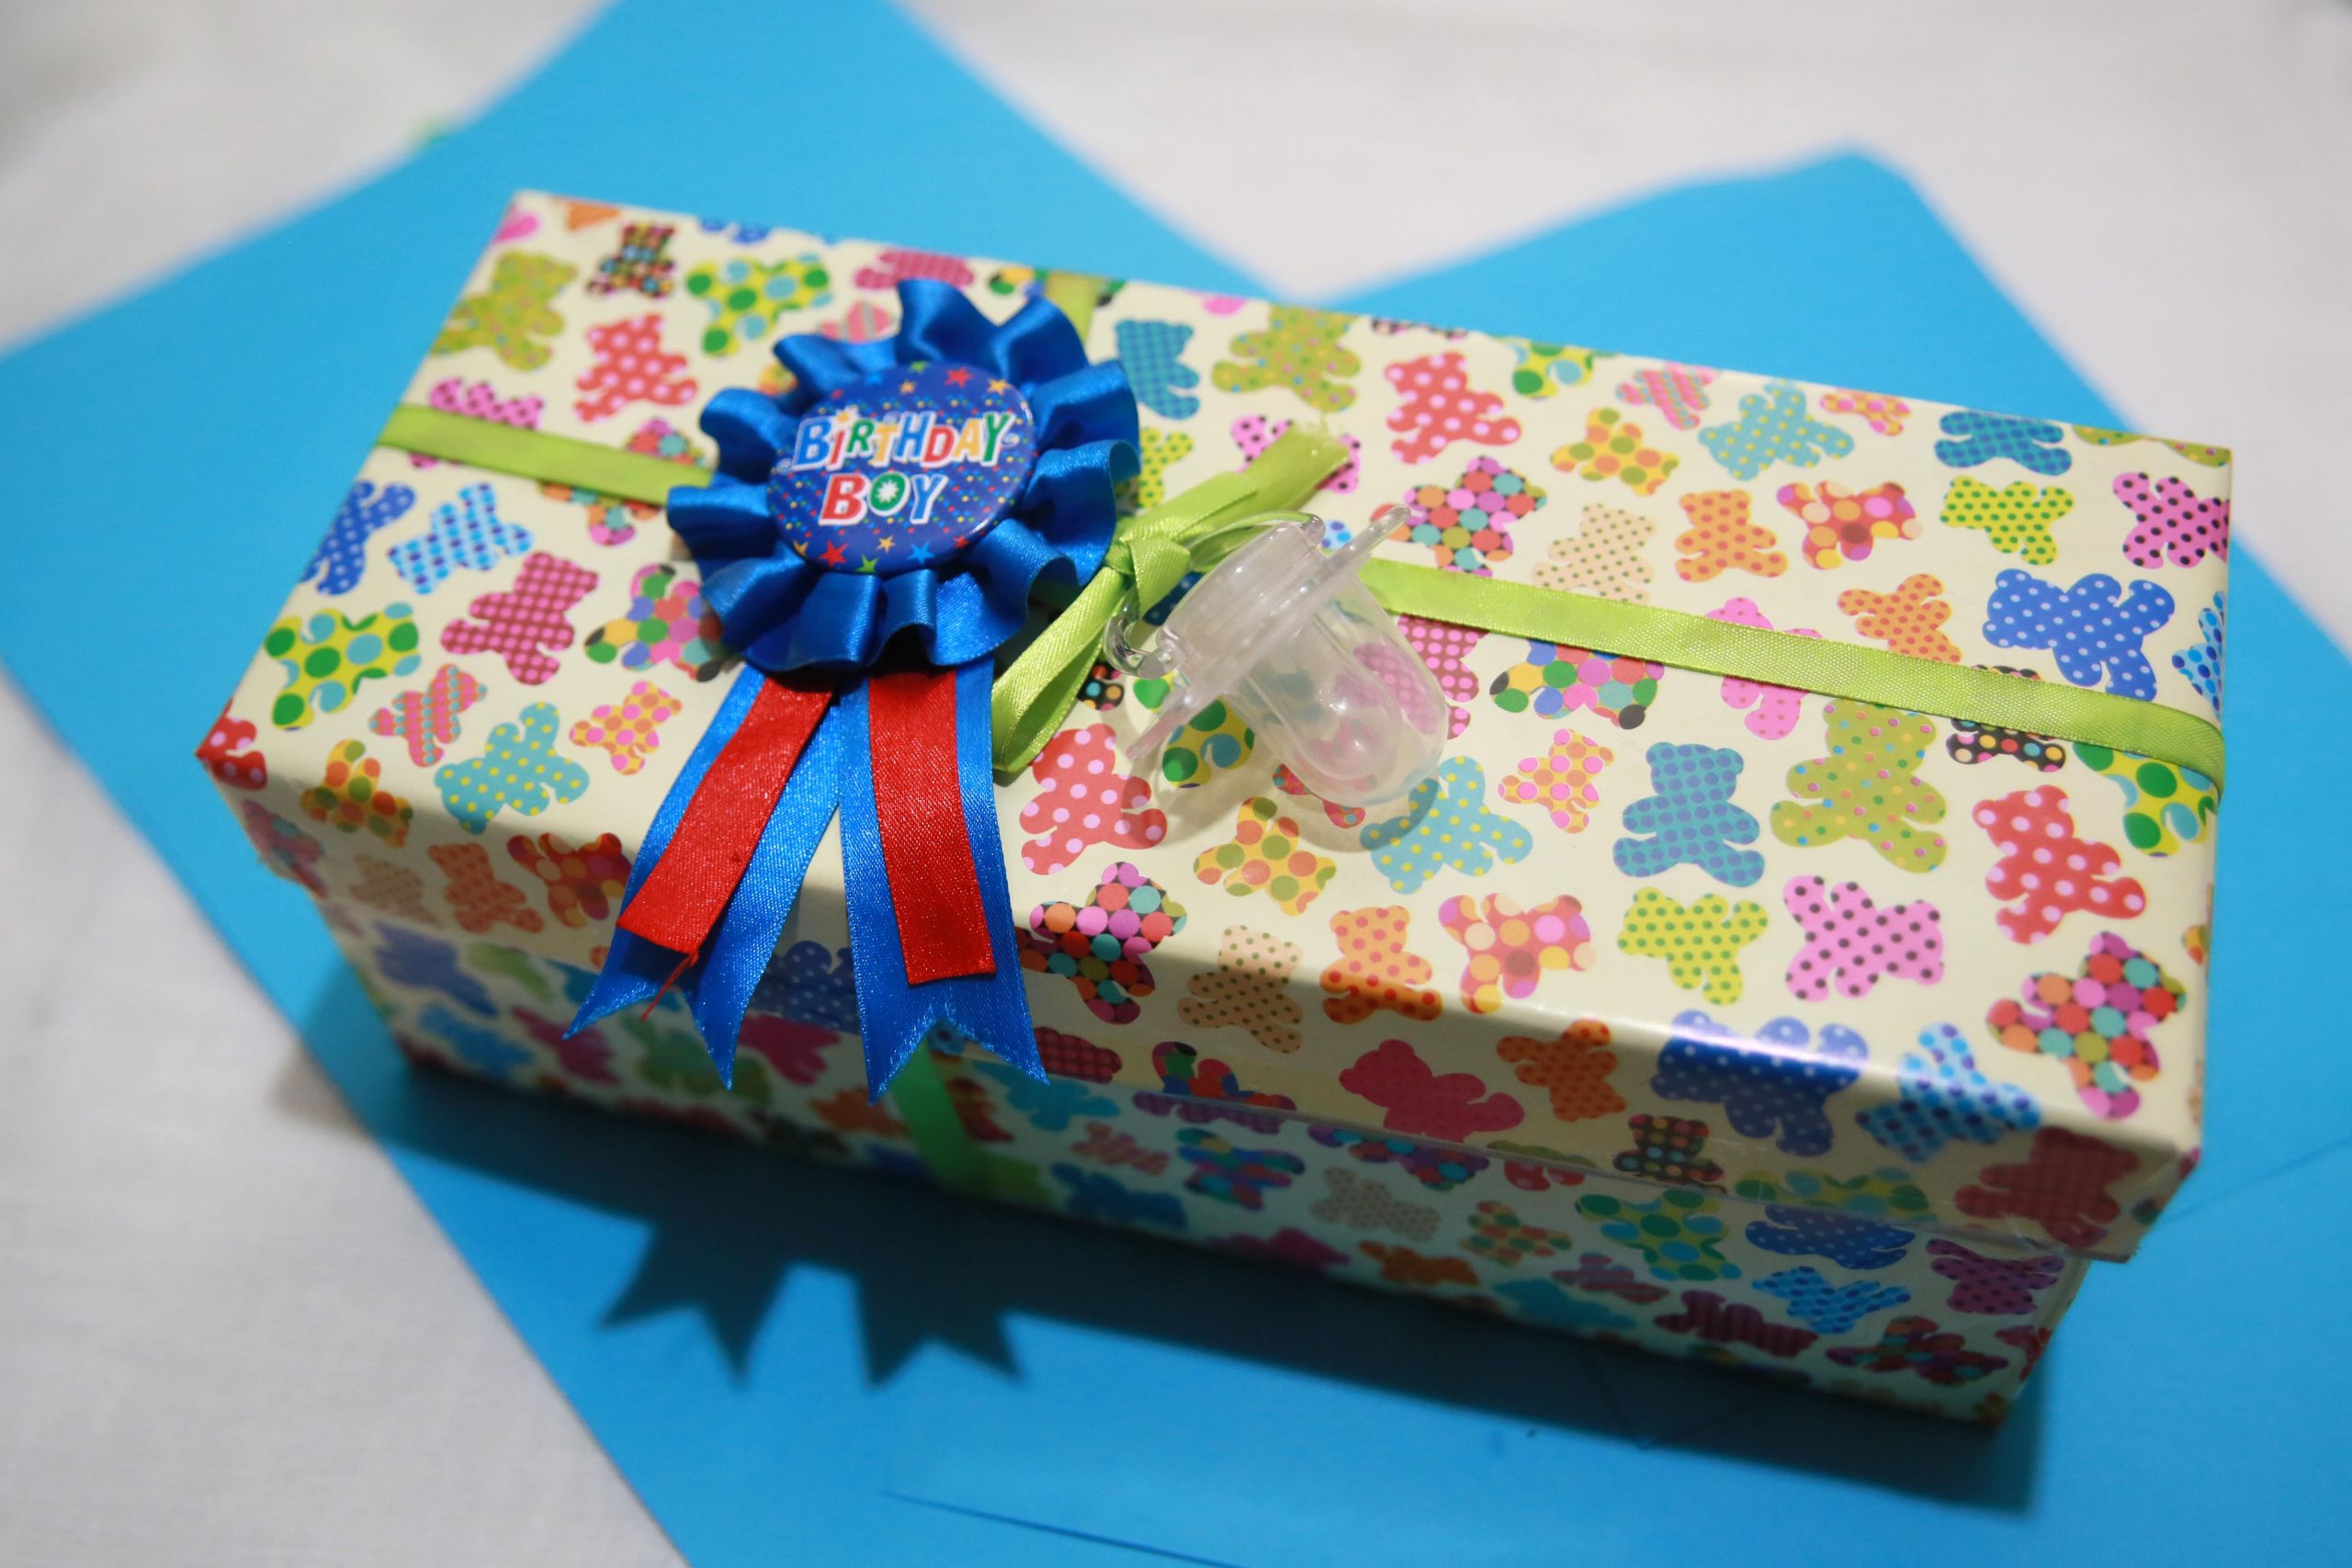 Toddler Boys Gift Ideas
 How to Wrap Gifts for a Baby Boy 9 Steps with